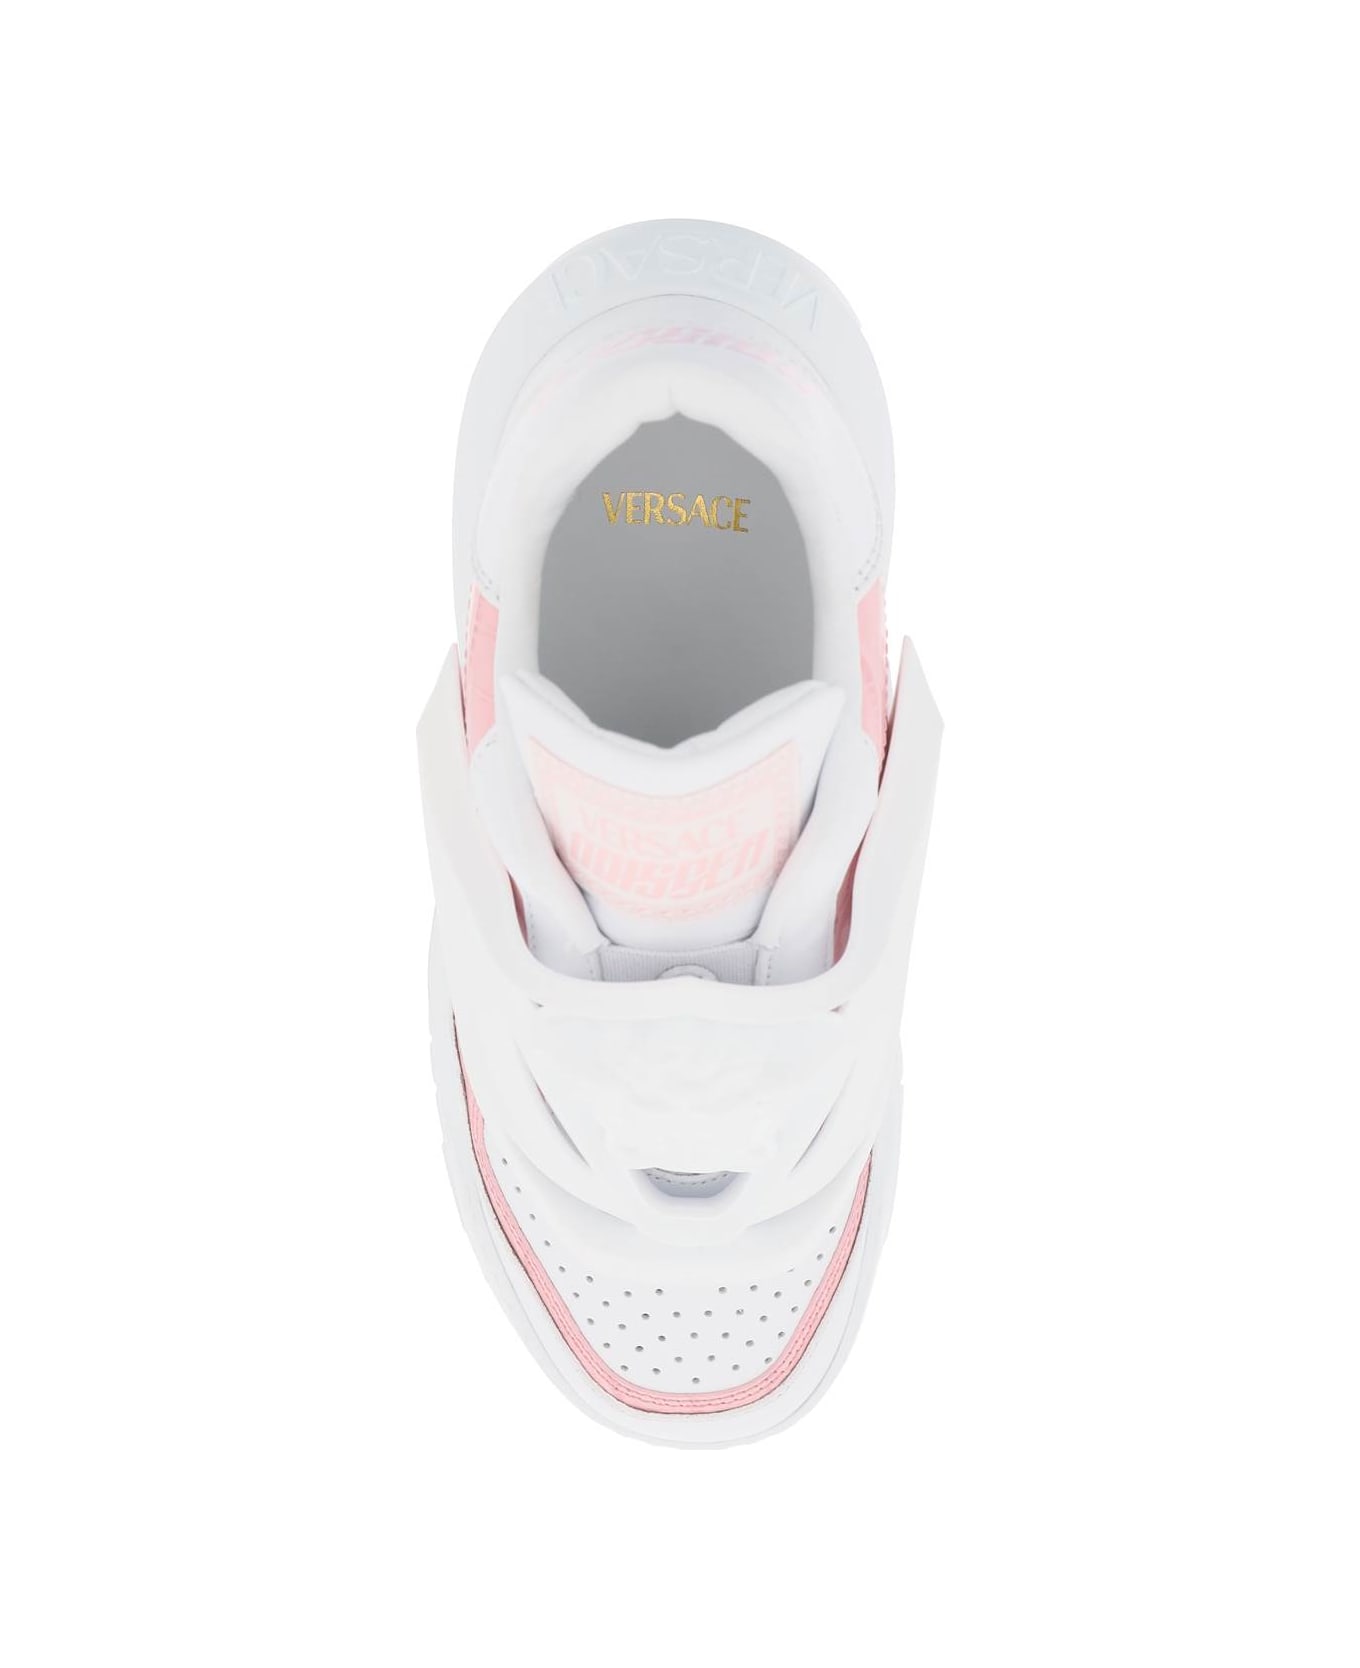 Versace Odissea Sneakers - WHITE ENGLISH ROSE (White)